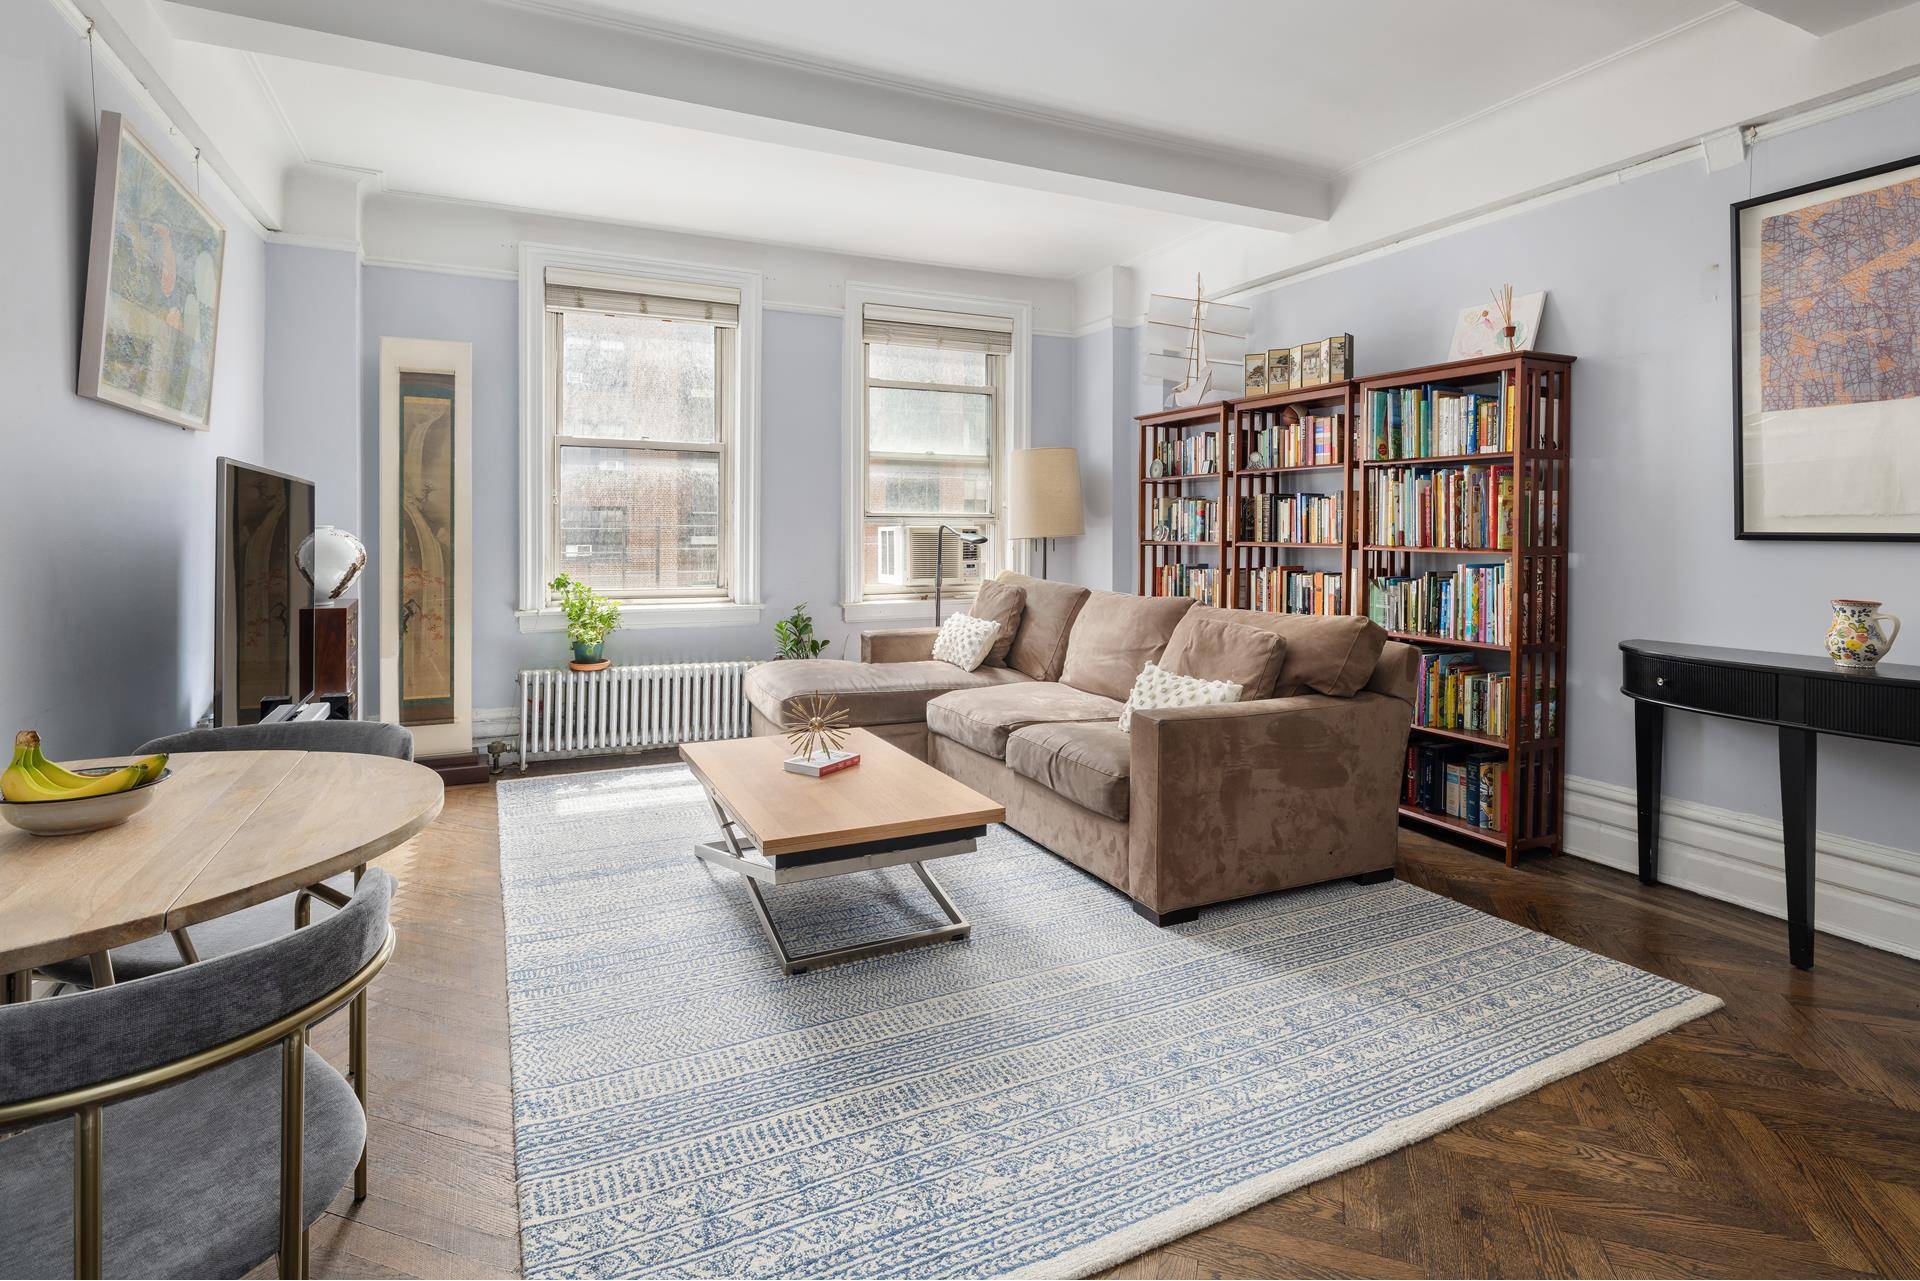 SPACIOUS 2 BEDROOM HOME ON ONE OF THE UPPER WEST SIDES MOST COVETED BLOCKS.